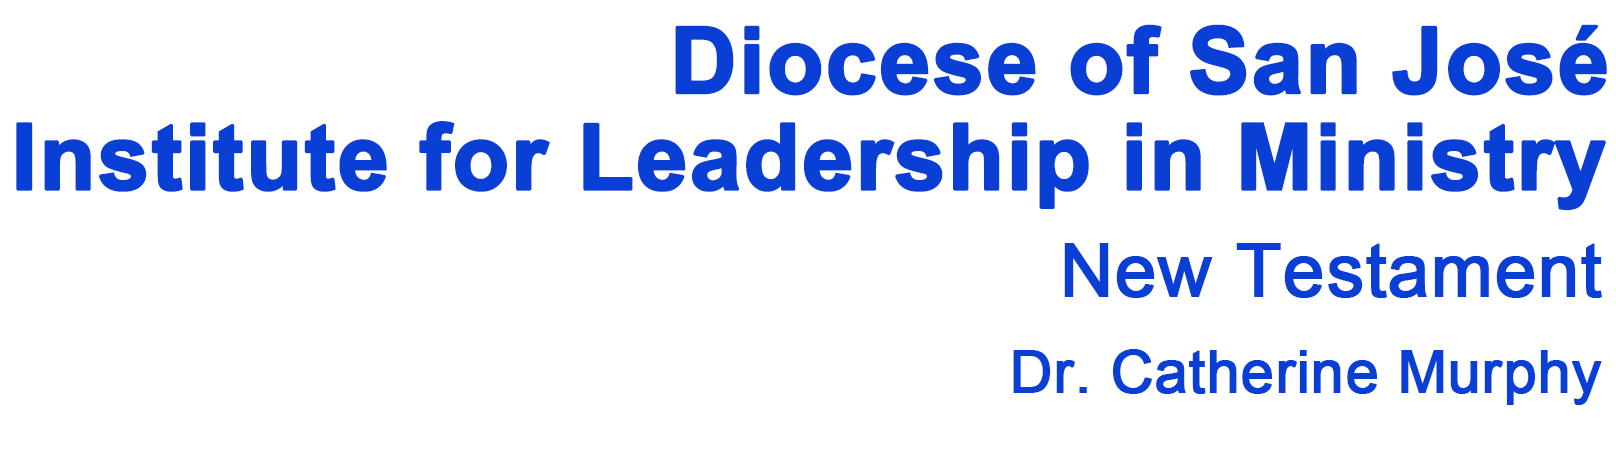 Diocese of San José, Institute for Leadership in Ministry